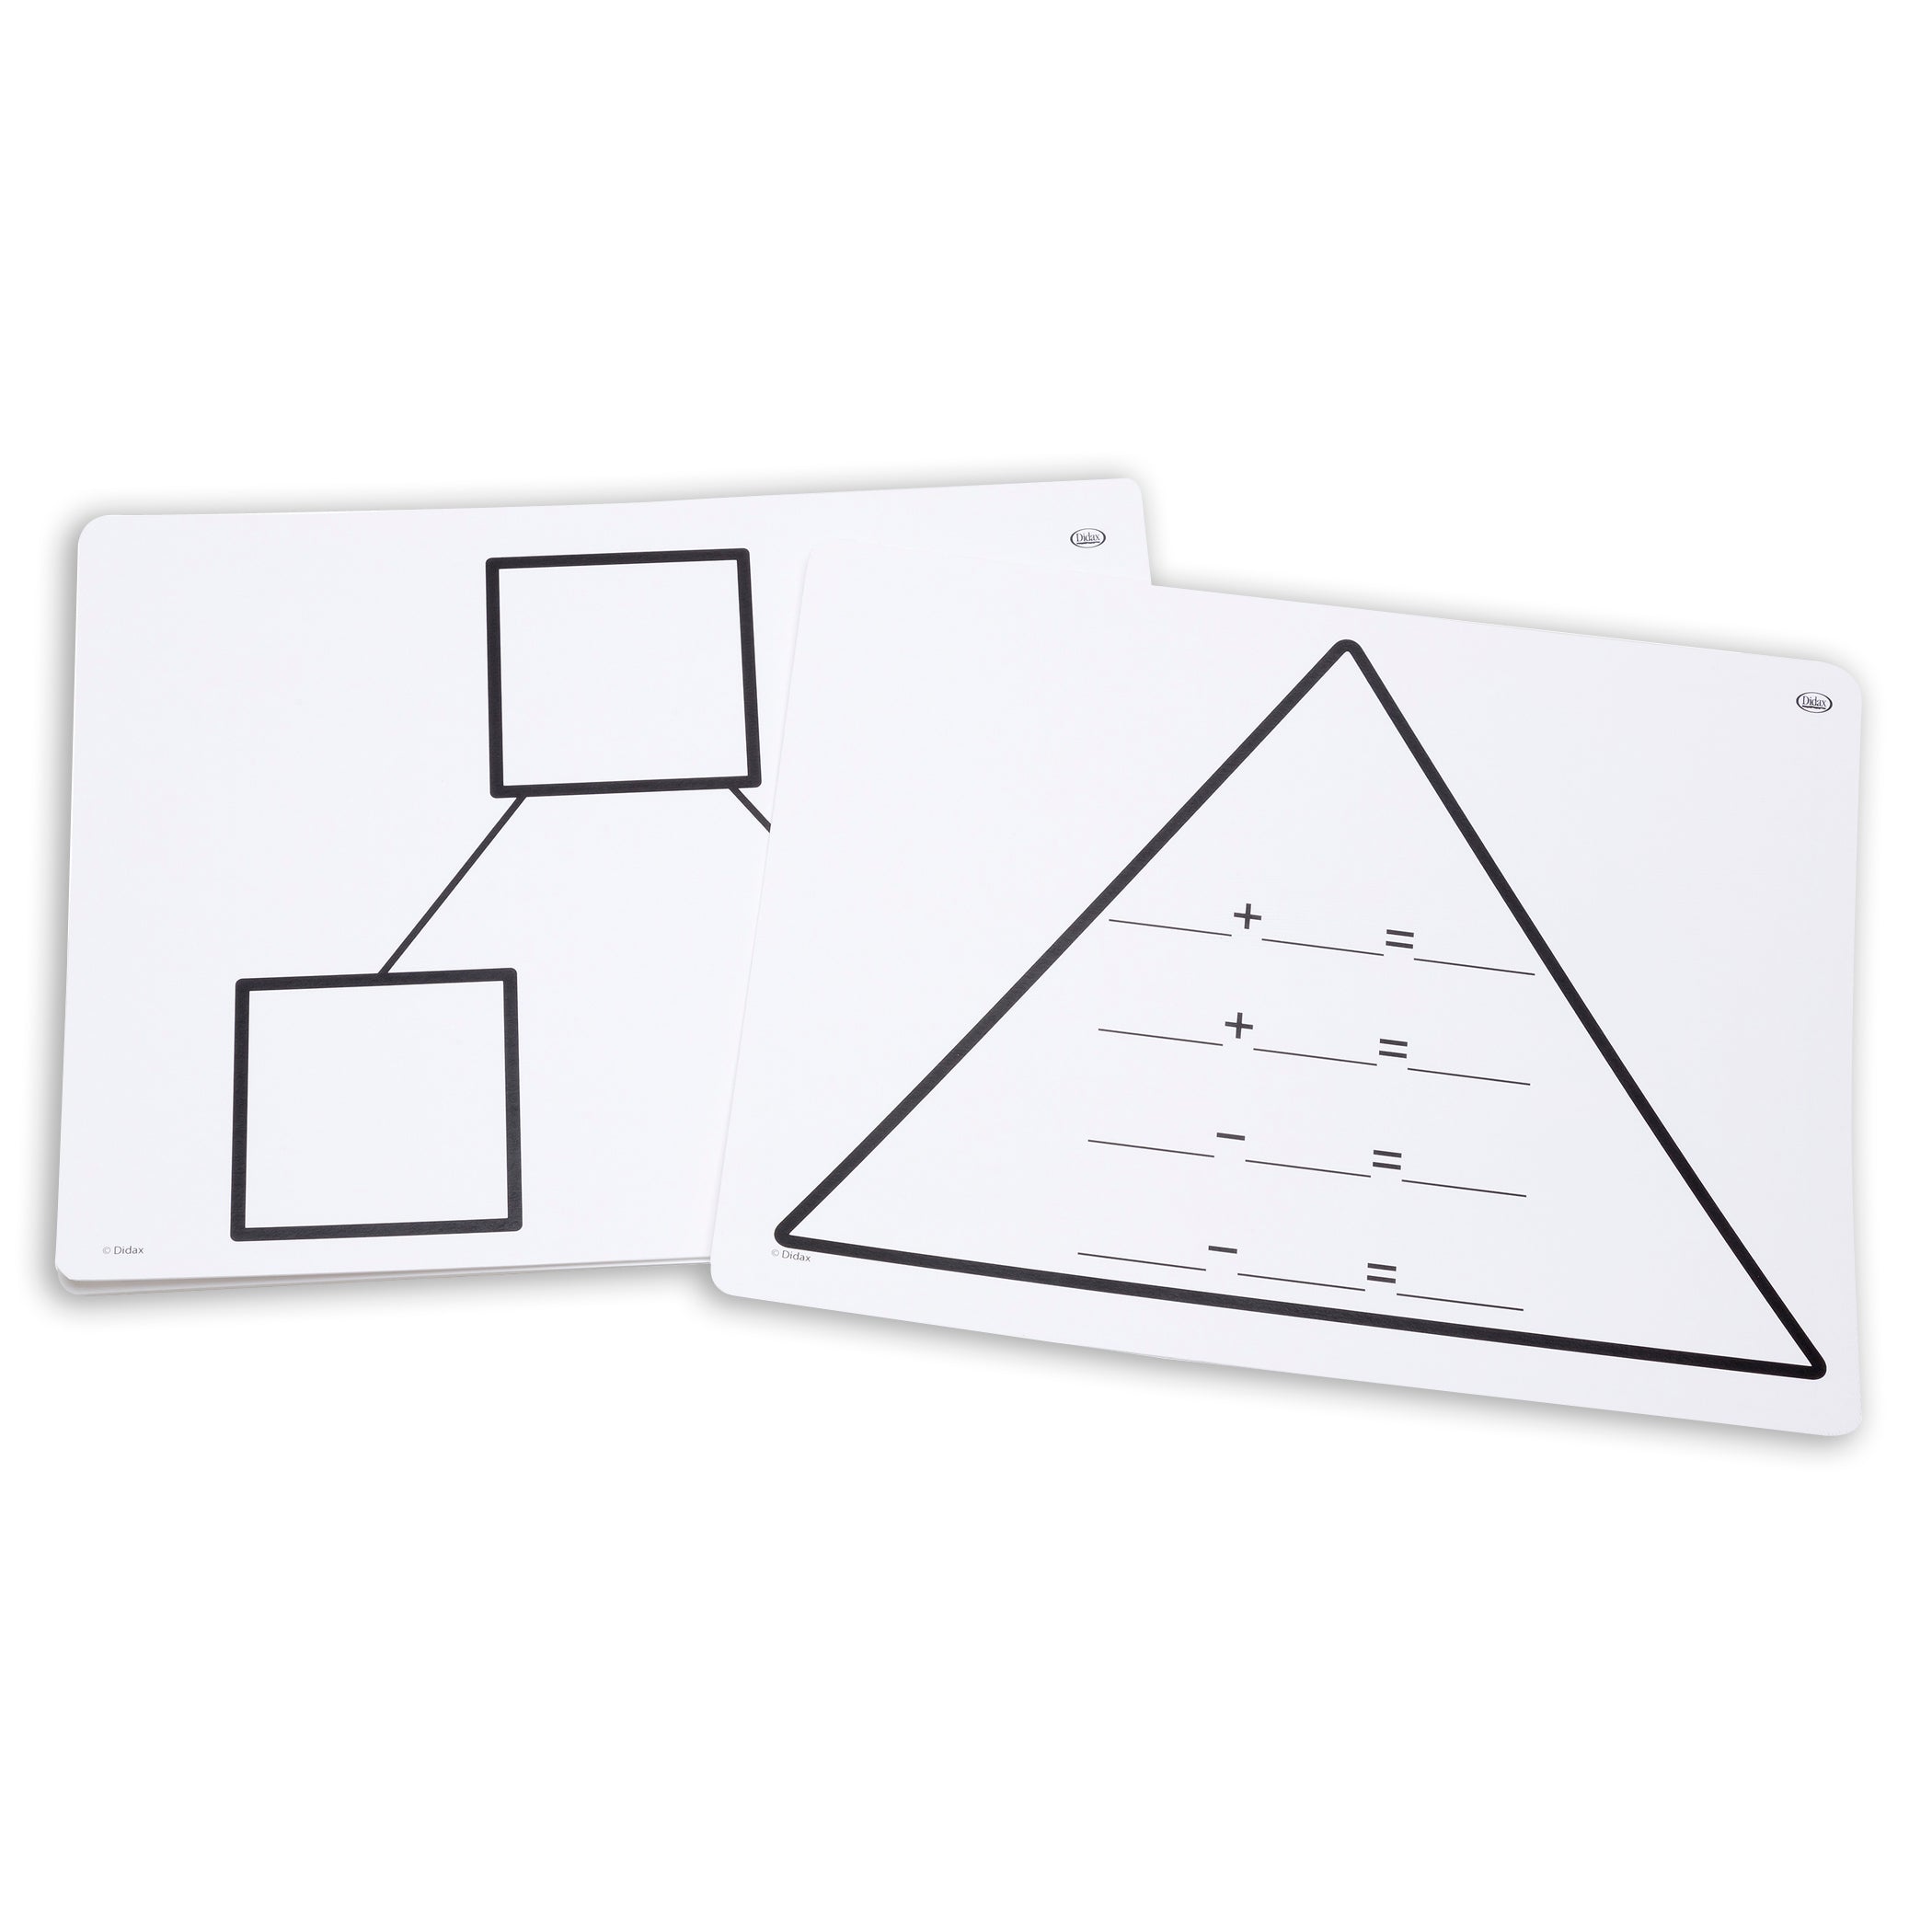 Write-On/Wipe-Off Fact Family Triangle Mats: Addition, Set of 10 - A1 School Supplies